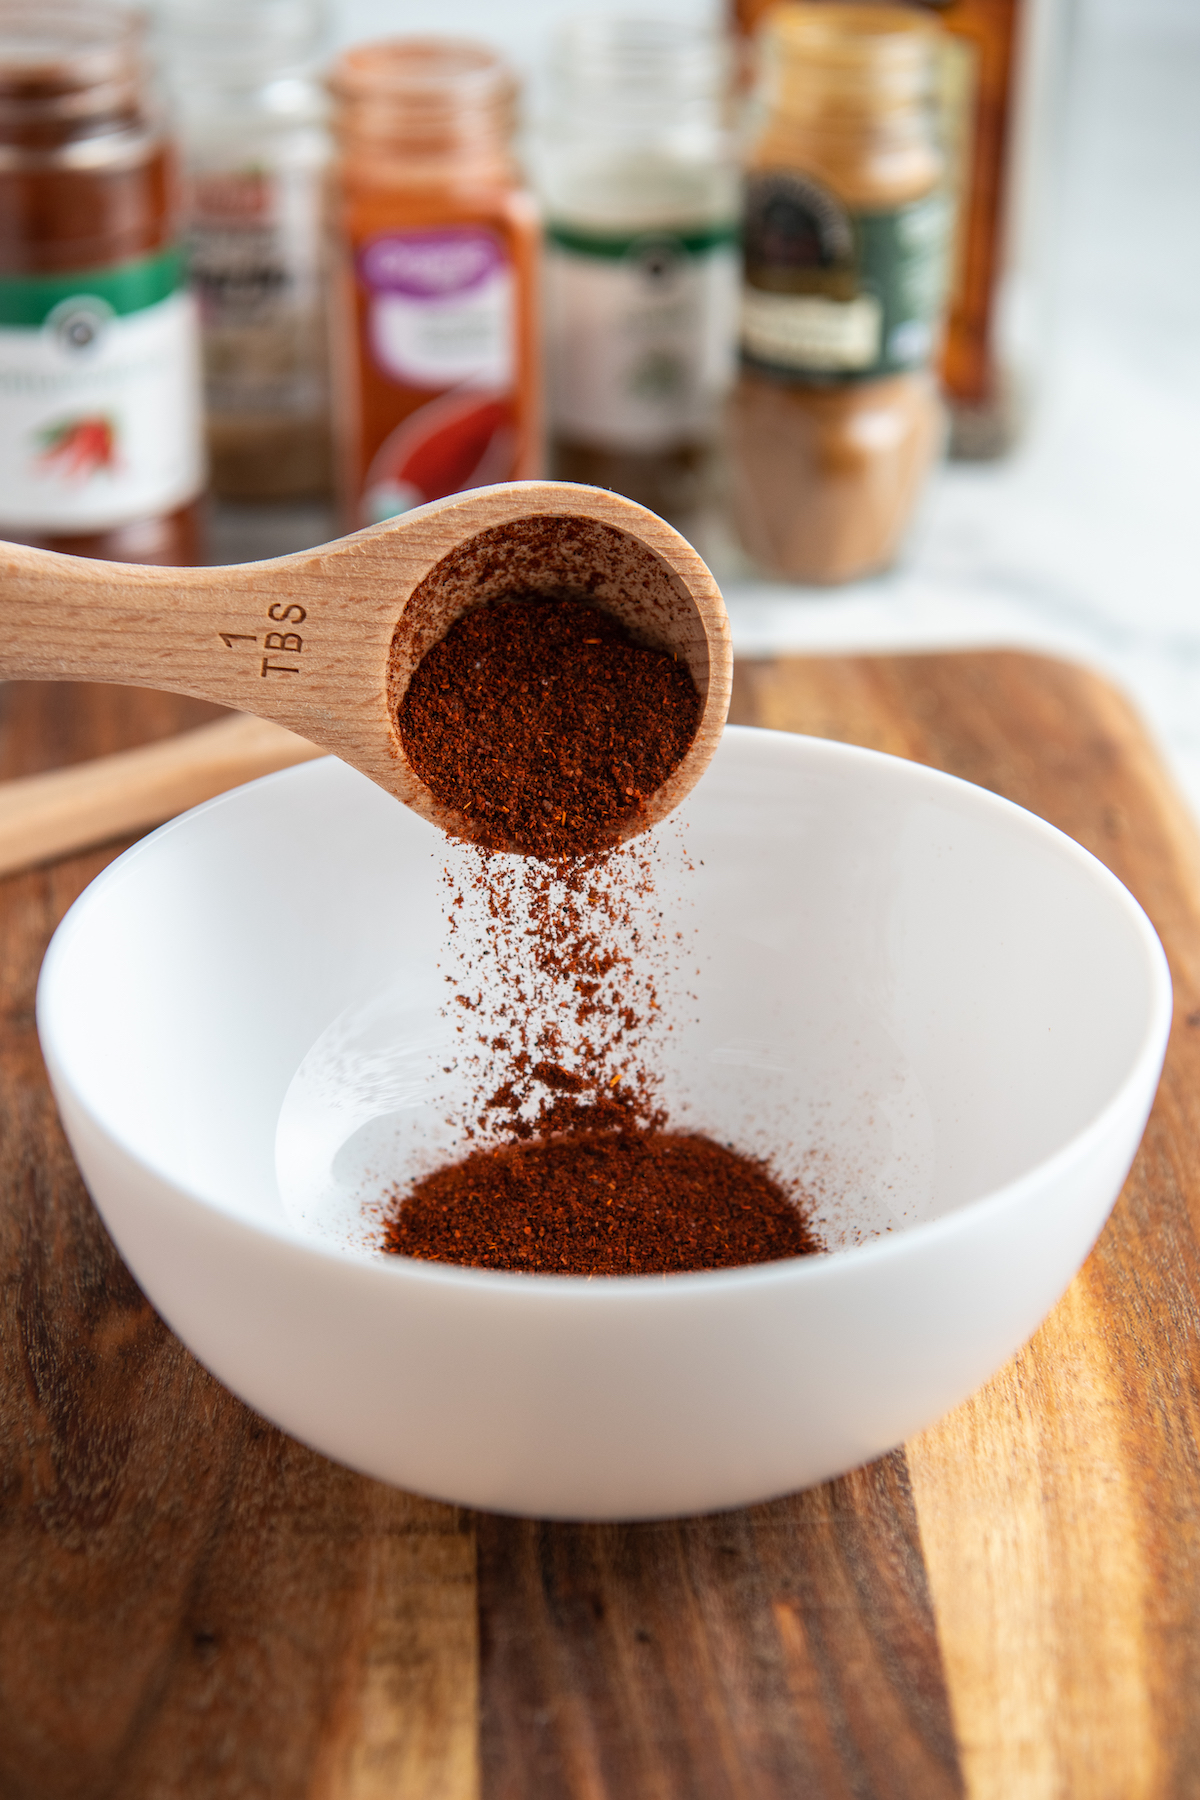 chili powder being poured into a white bowl with a wooden spoon.